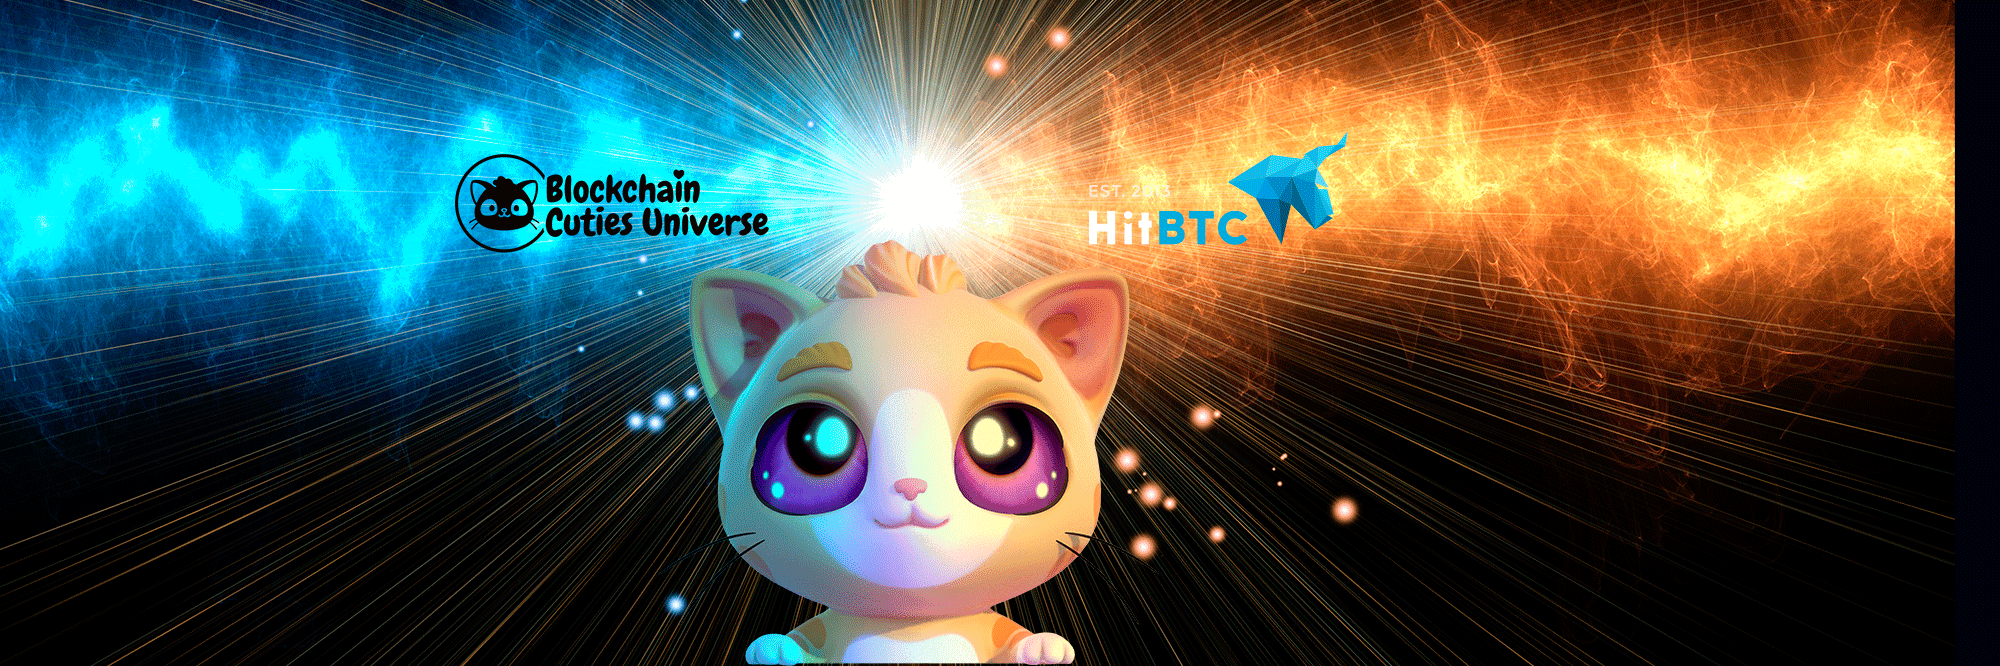 BlockchainCuties HitBTCexchange crypto games blockchaingames The popular blockchain game Blockchain Cuties announced today the upcoming cooperation with HitBTC Exchange in order to list CUTE Coin to the HitBTC platform.